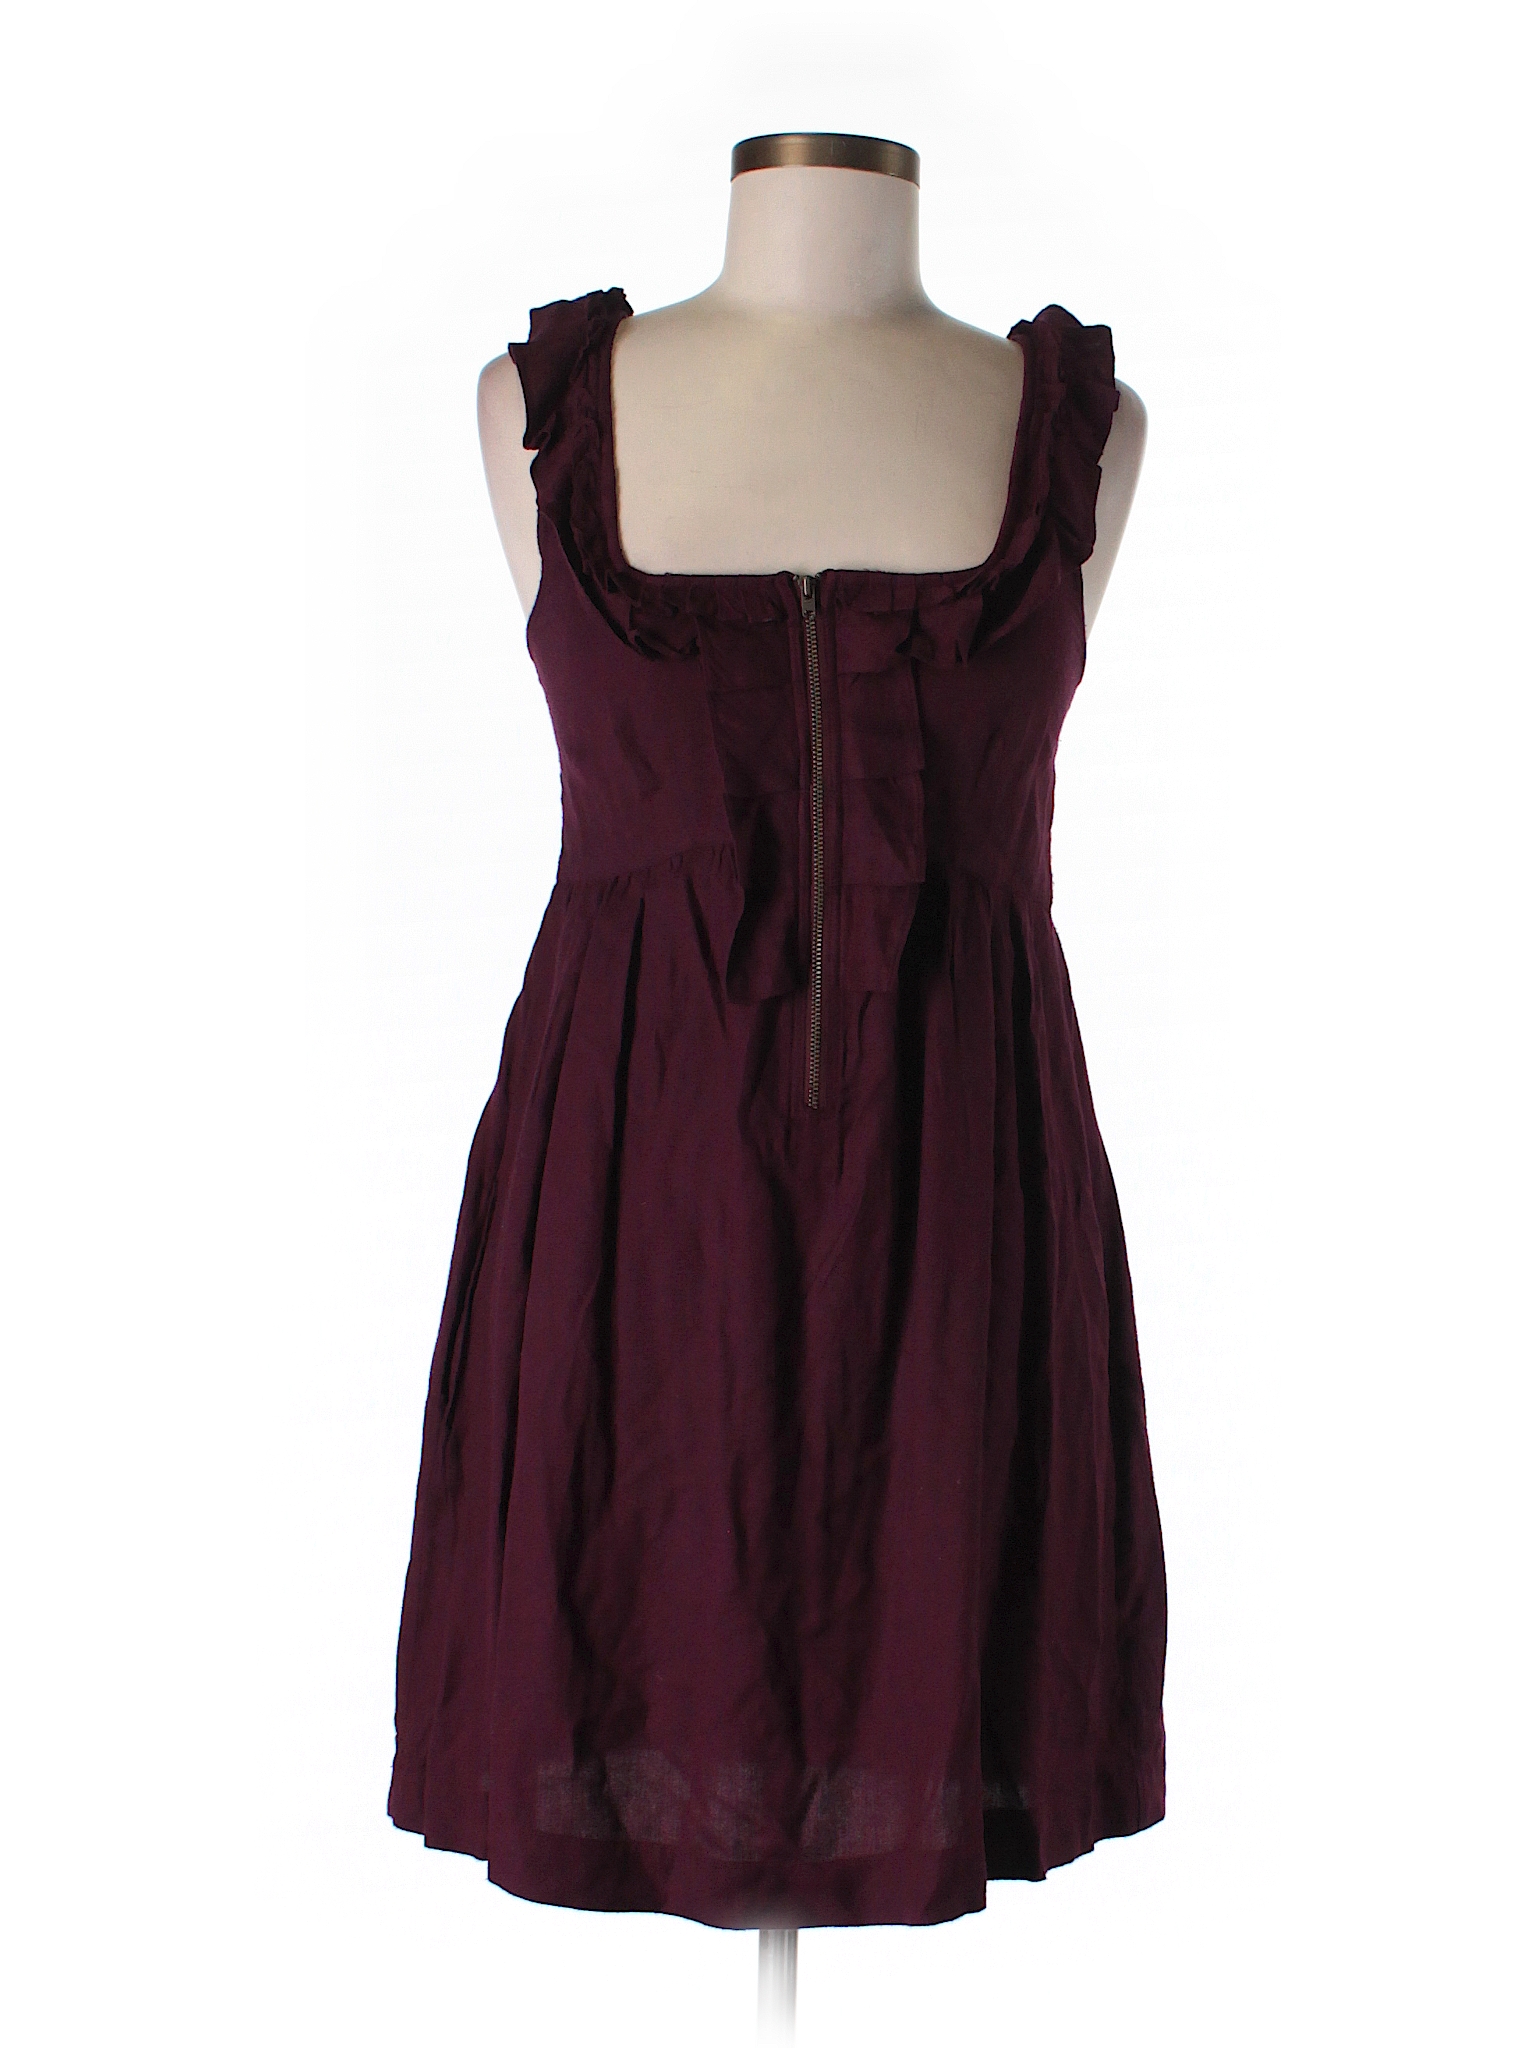 Kimchi Blue 100% Rayon Solid Burgundy Casual Dress Size M - 73% off ...